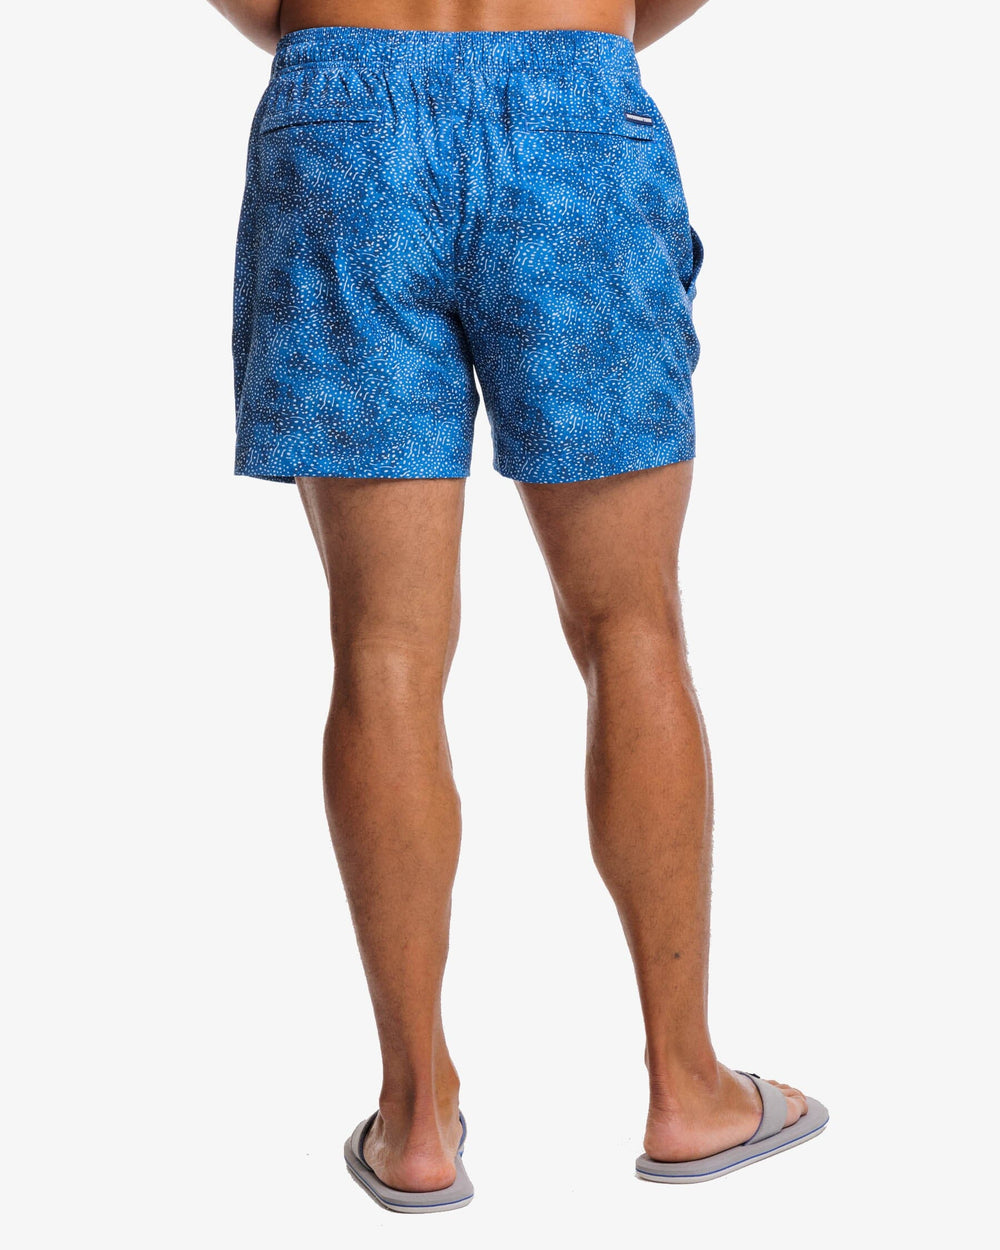 The back view of the Southern Tide Well Well Whale Printed Swim Trunk by Southern Tide - Atlantic Blue